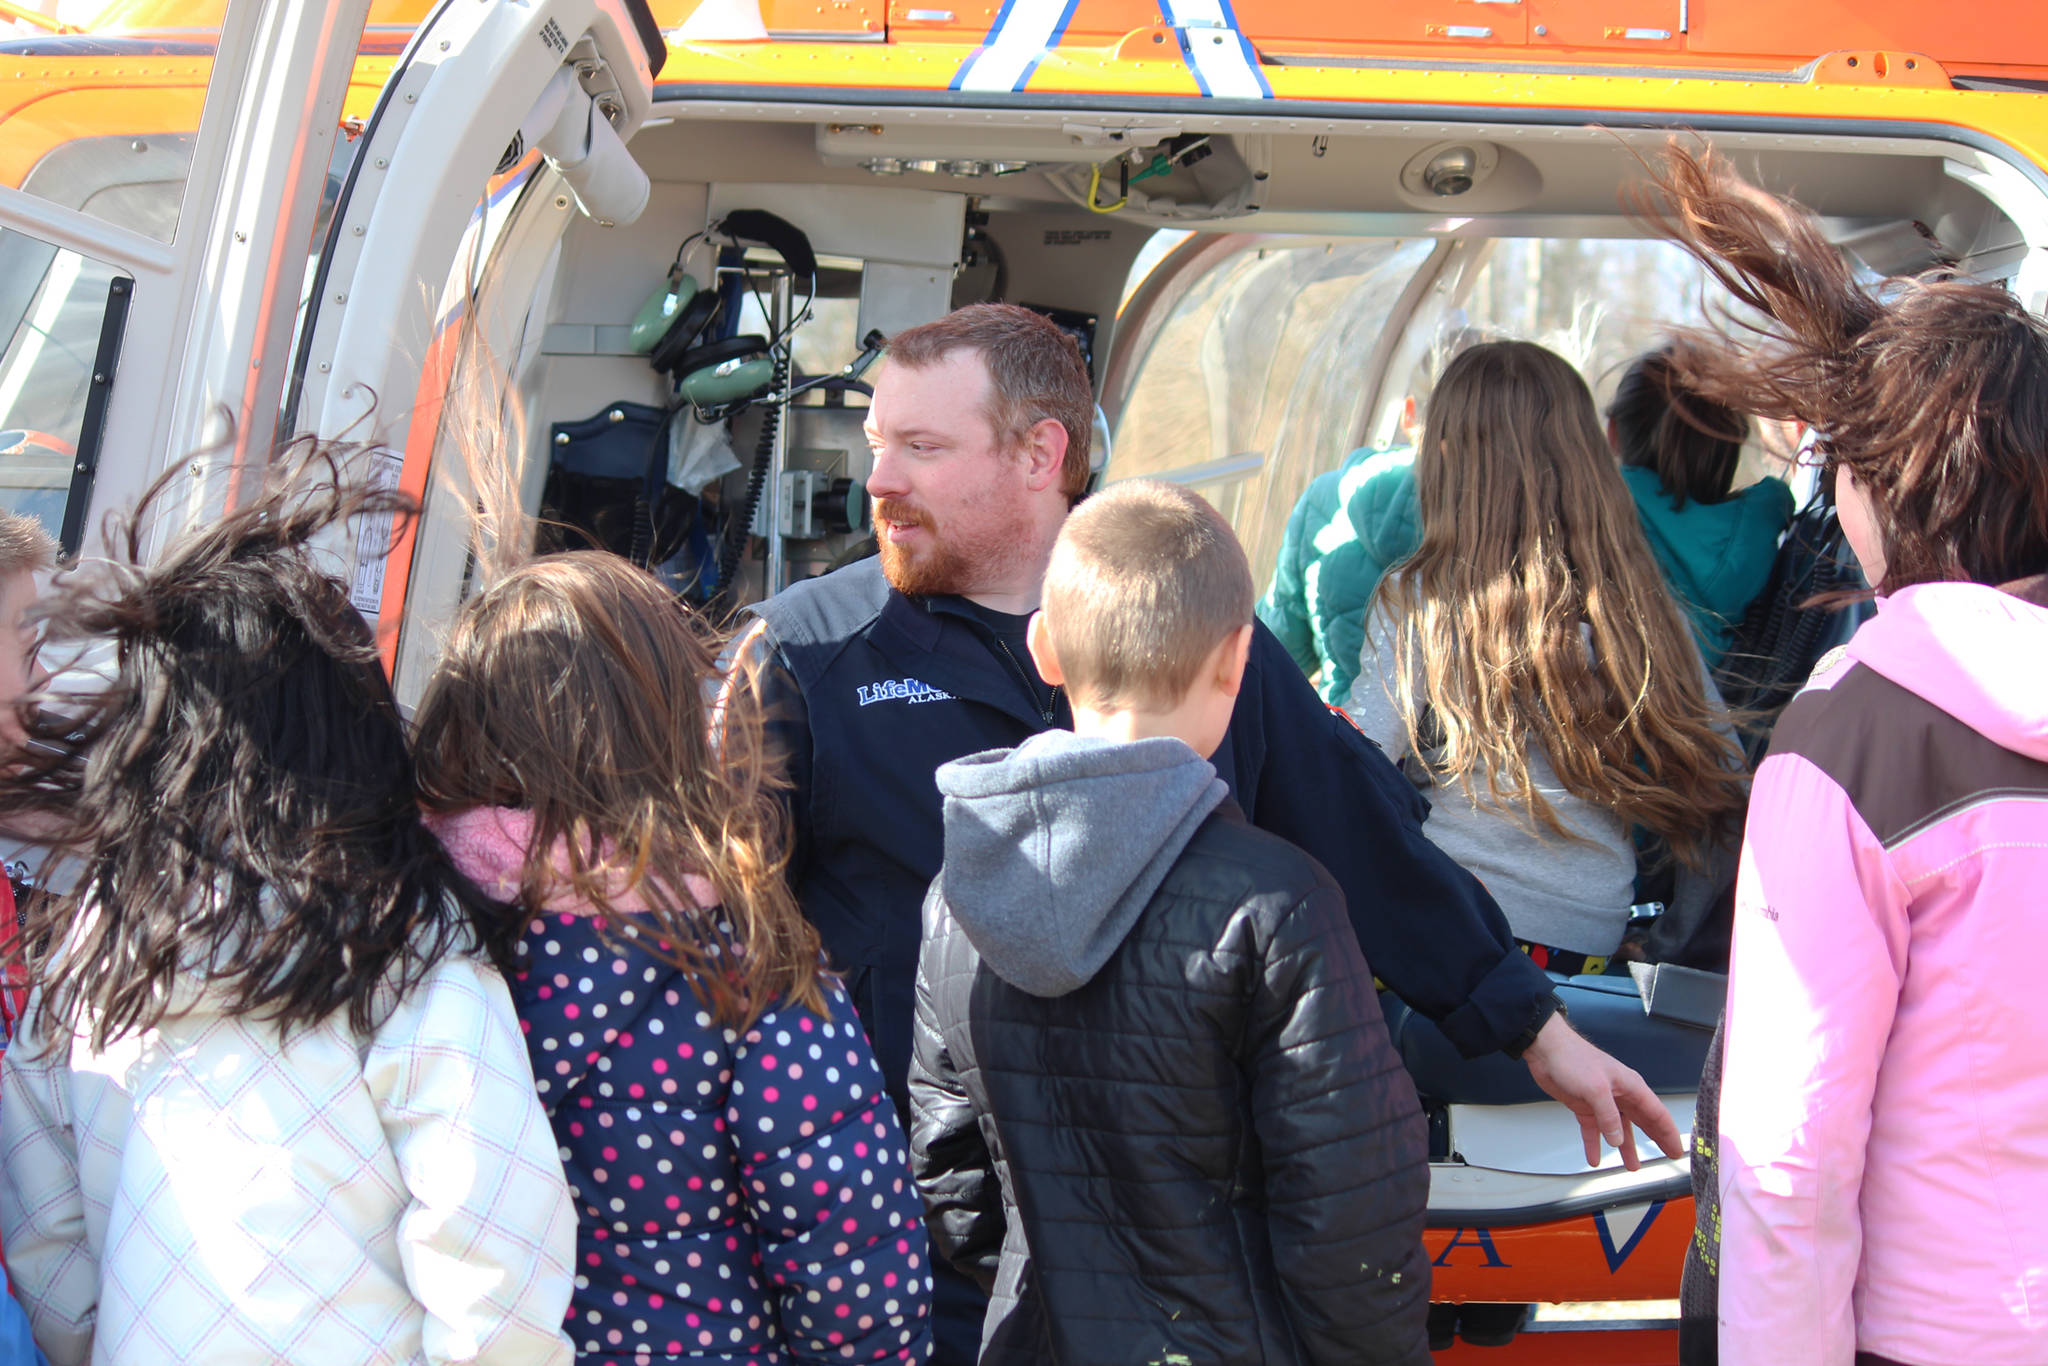 Paramedic Wes Raley shows the inside of a LifeMed helicopter to students from Chapman School on Friday, May 11, 2018 at the school in Anchor Point, Alaska (Photo by Megan Pacer/Homer News)